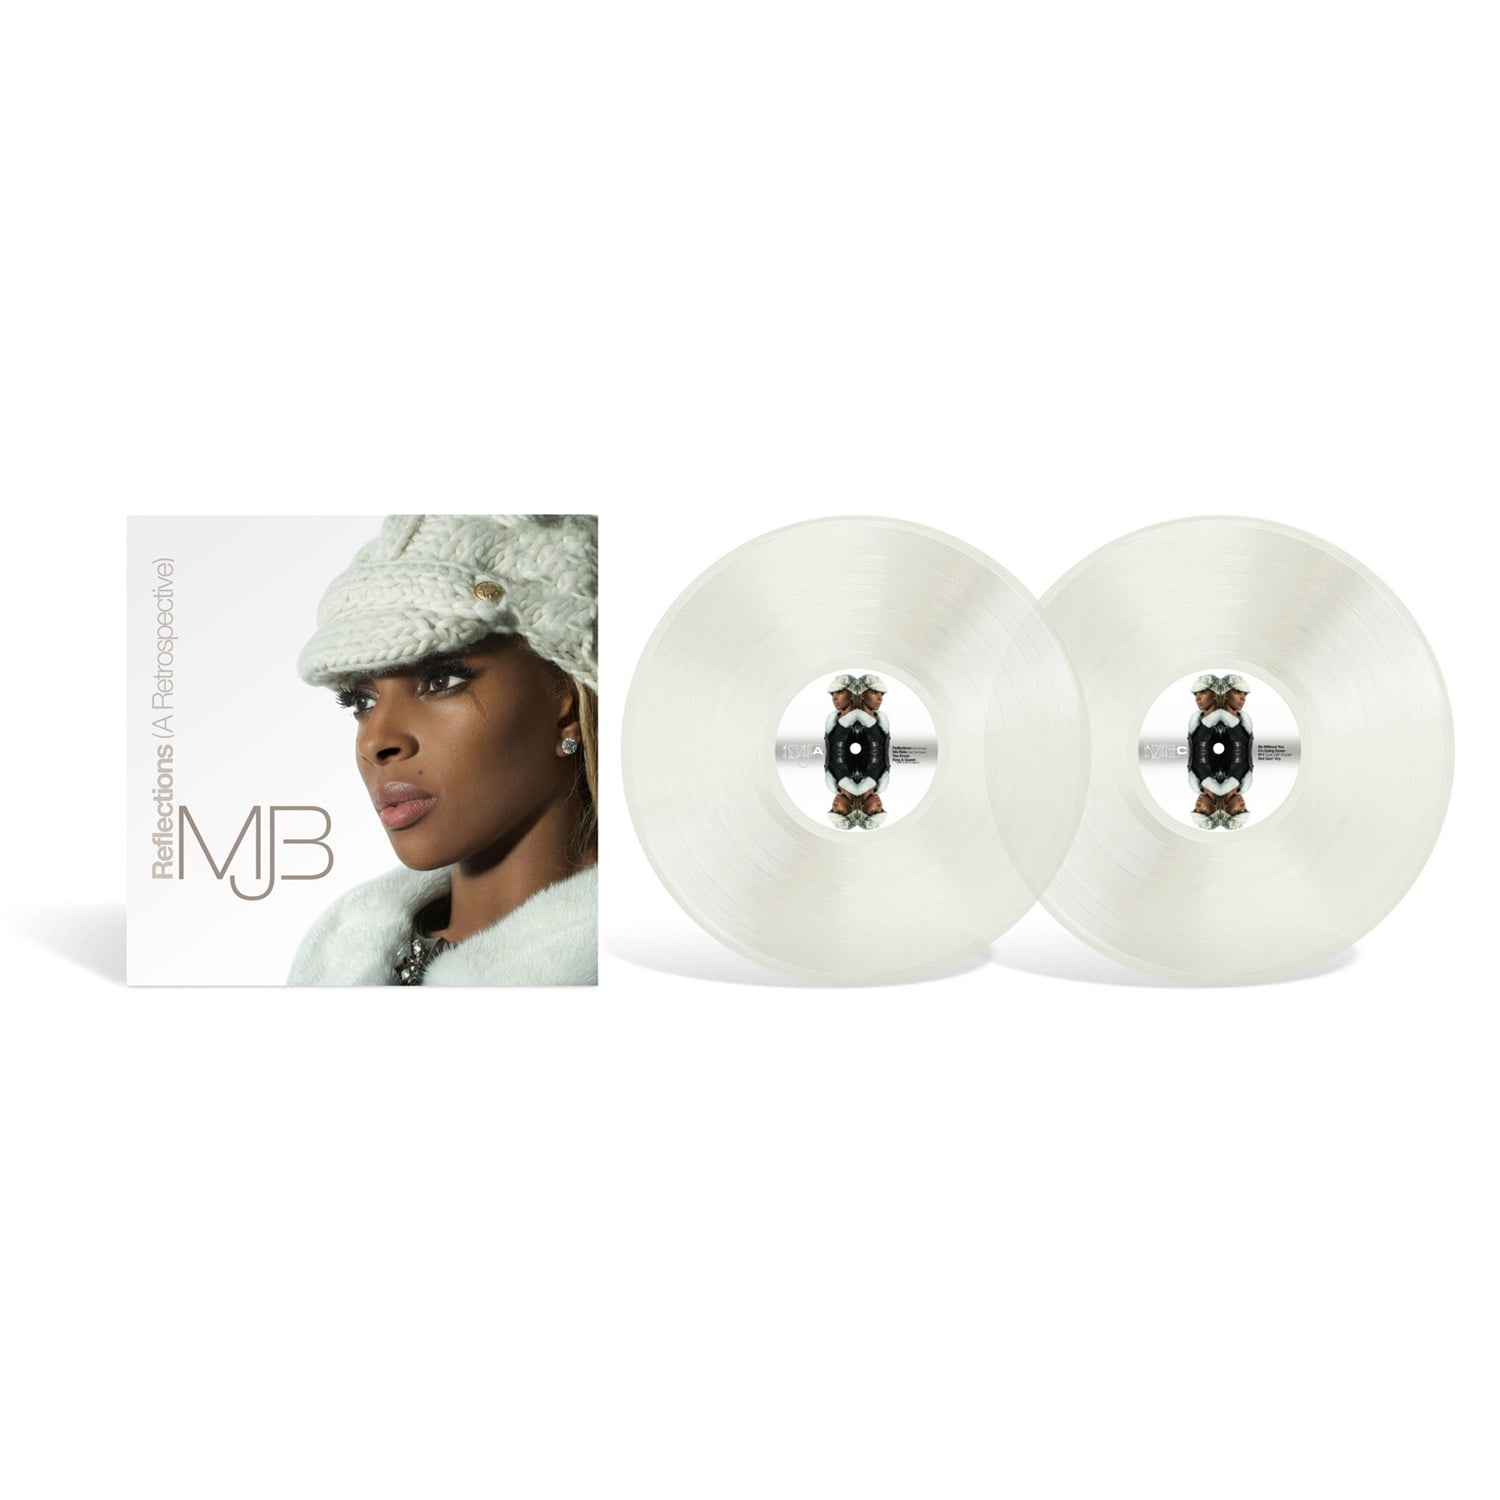 Mary J. Blige - Reflections Exclusive Limited Milky Clear Color Vinyl ...